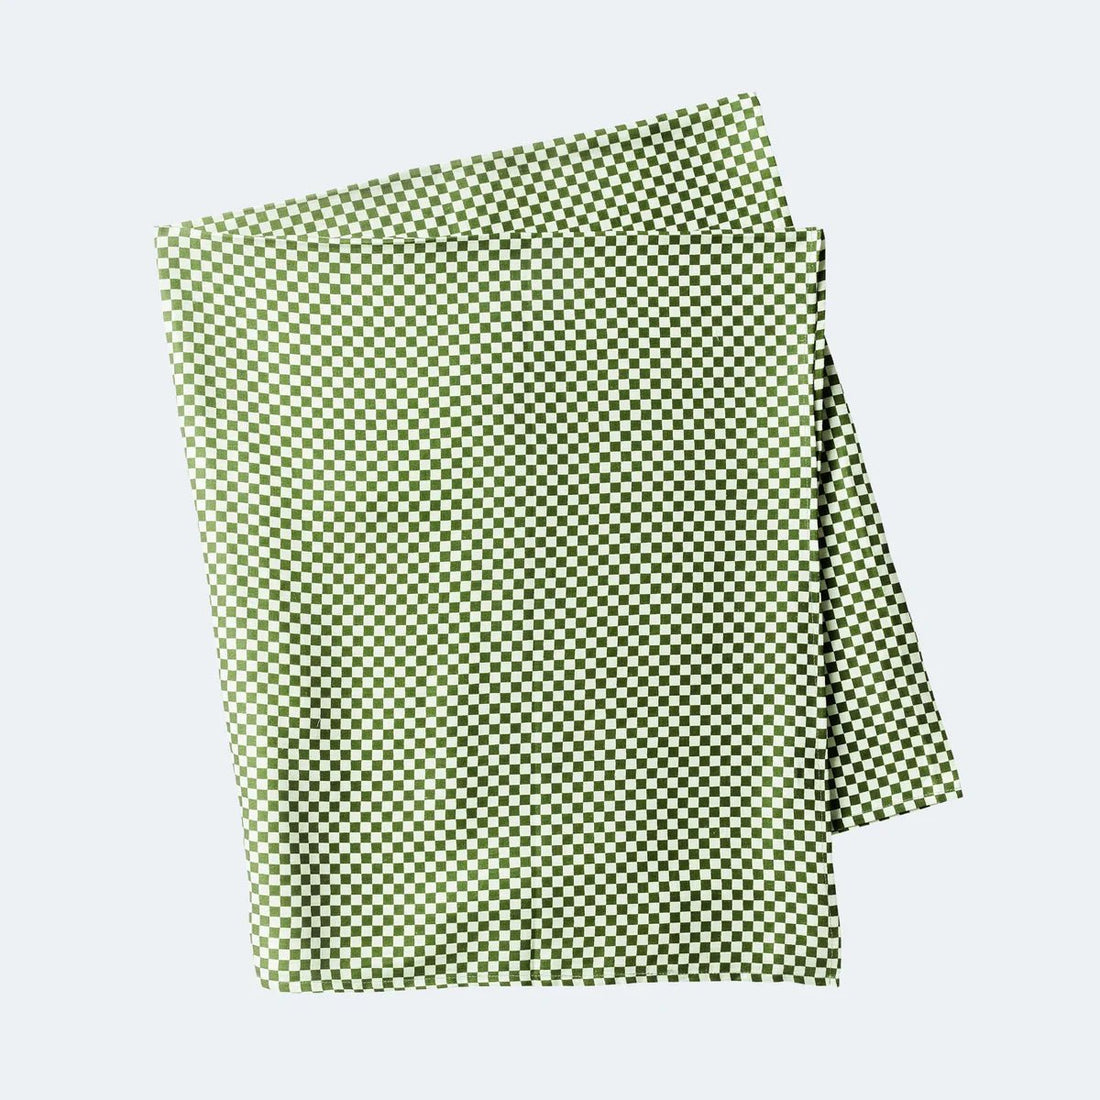 Bonnie &amp; Neil - Tiny Checkers Tablecloth, Leaf - The Flower Crate